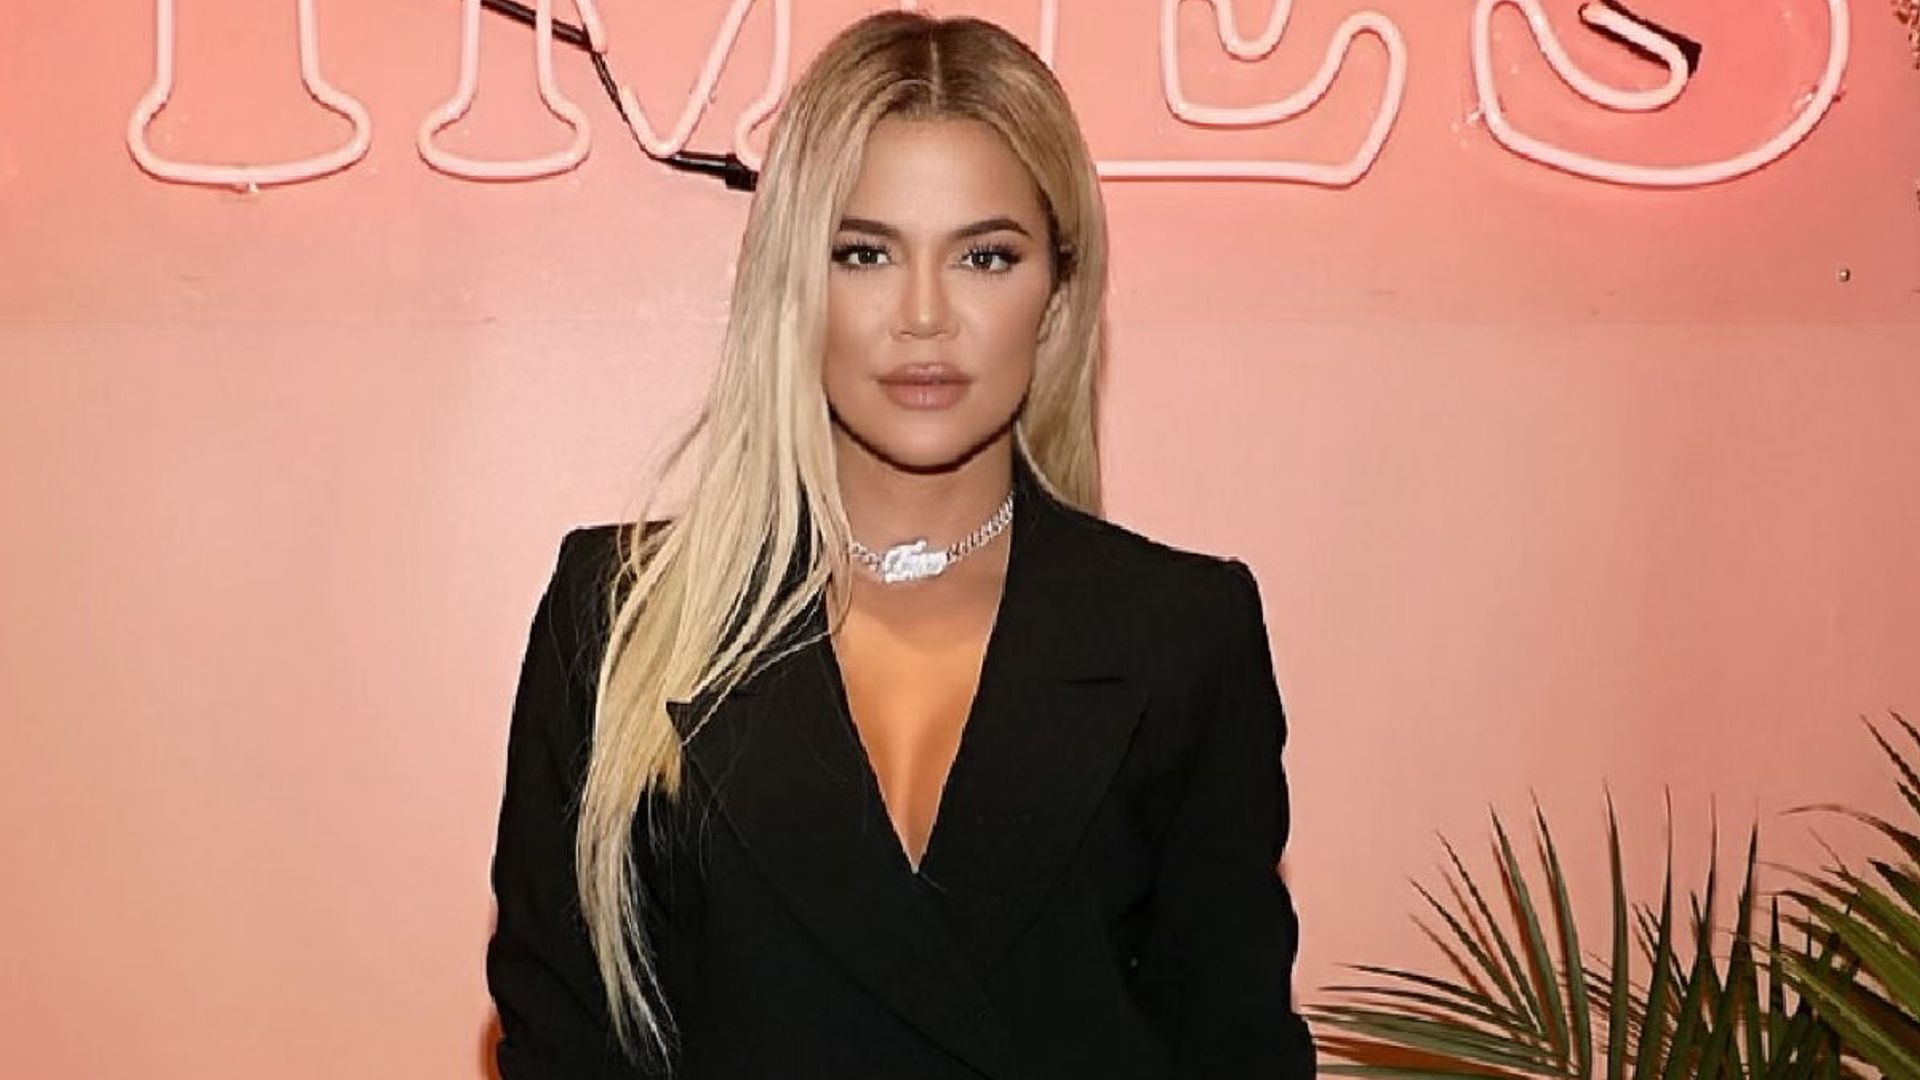 Flash sale alert: Khloe Kardashian's hottest Good American looks are up to 80% off